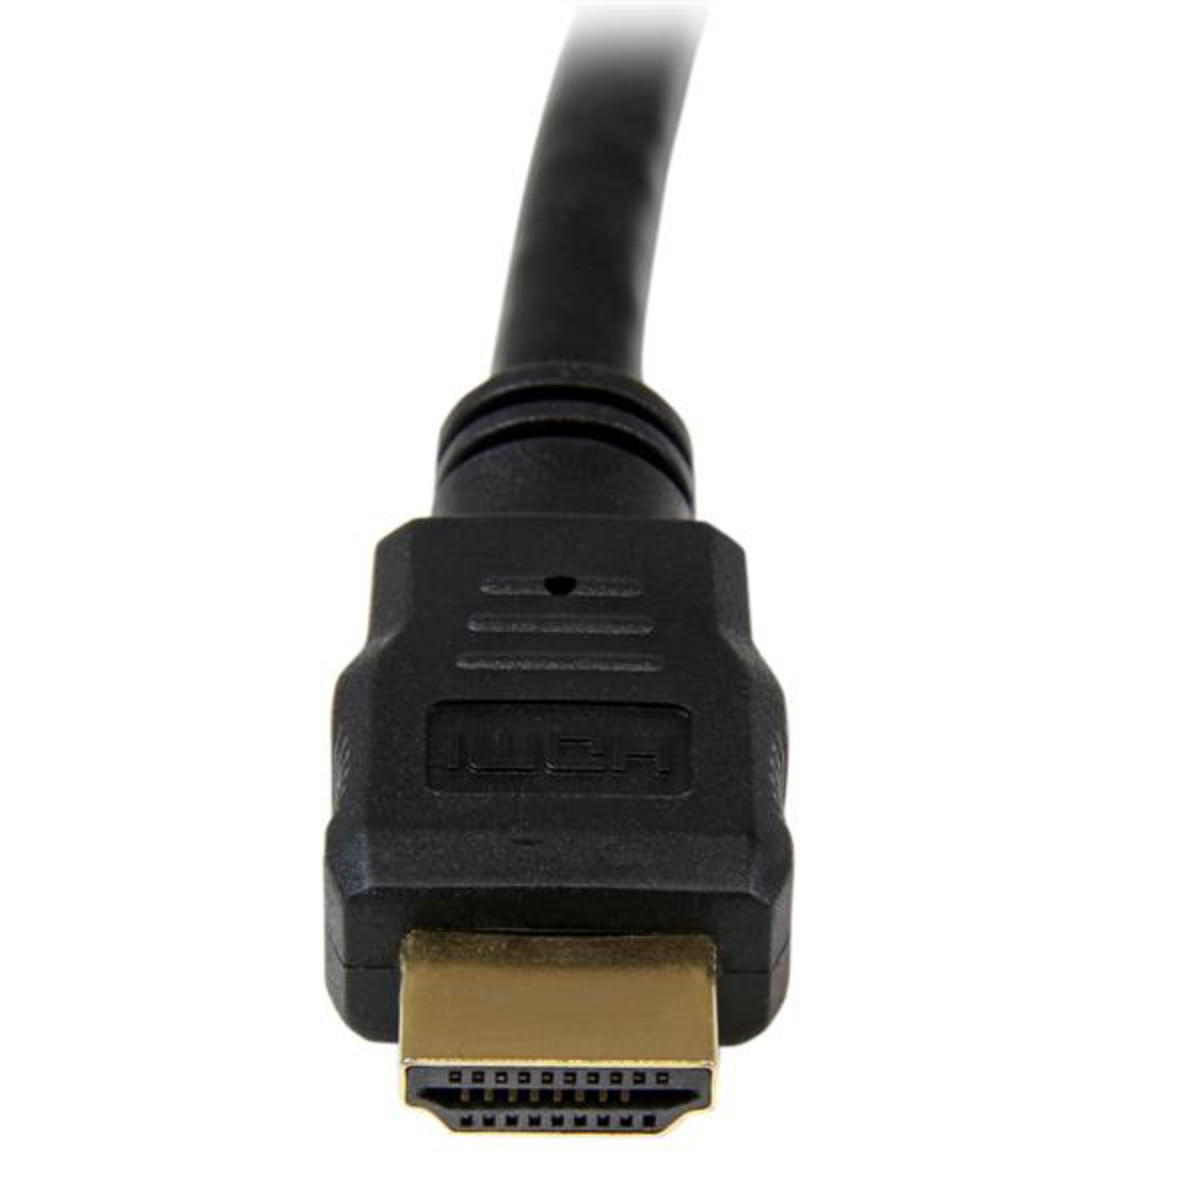 1.5m High Speed HDMI Cable